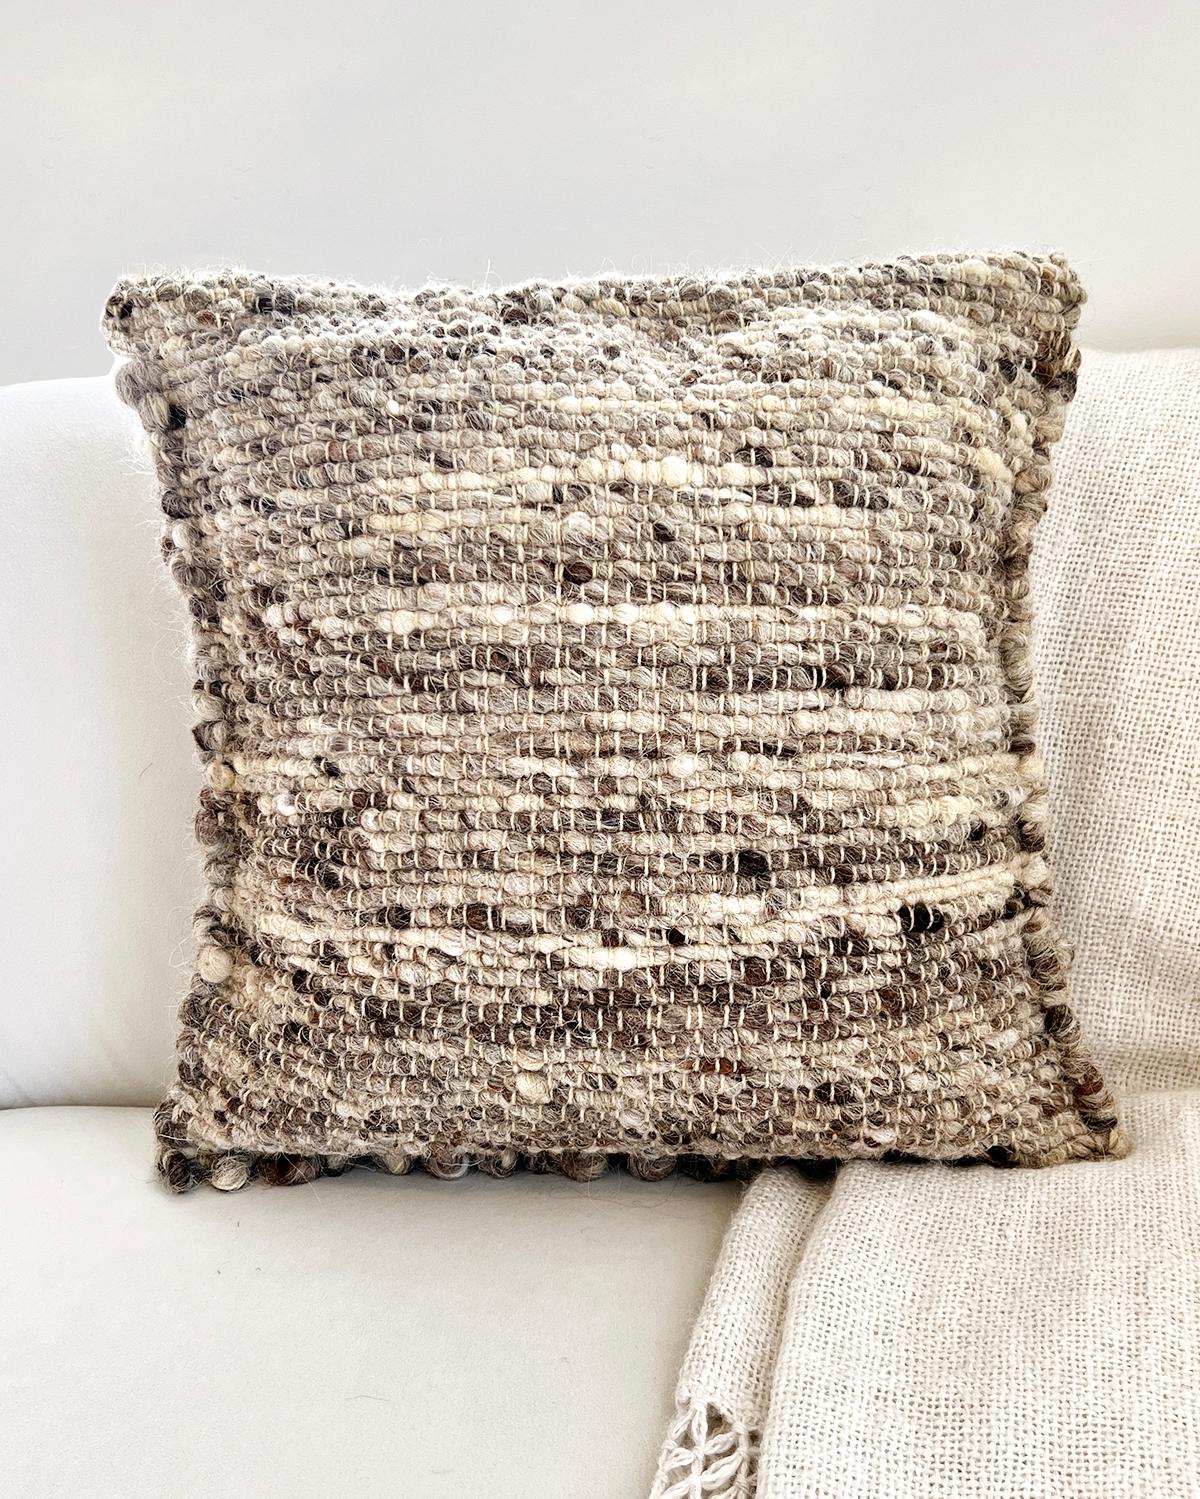 Hand-Woven Fatima Bobble Throw Pillow in Gray made from 100% sheep wool - 20